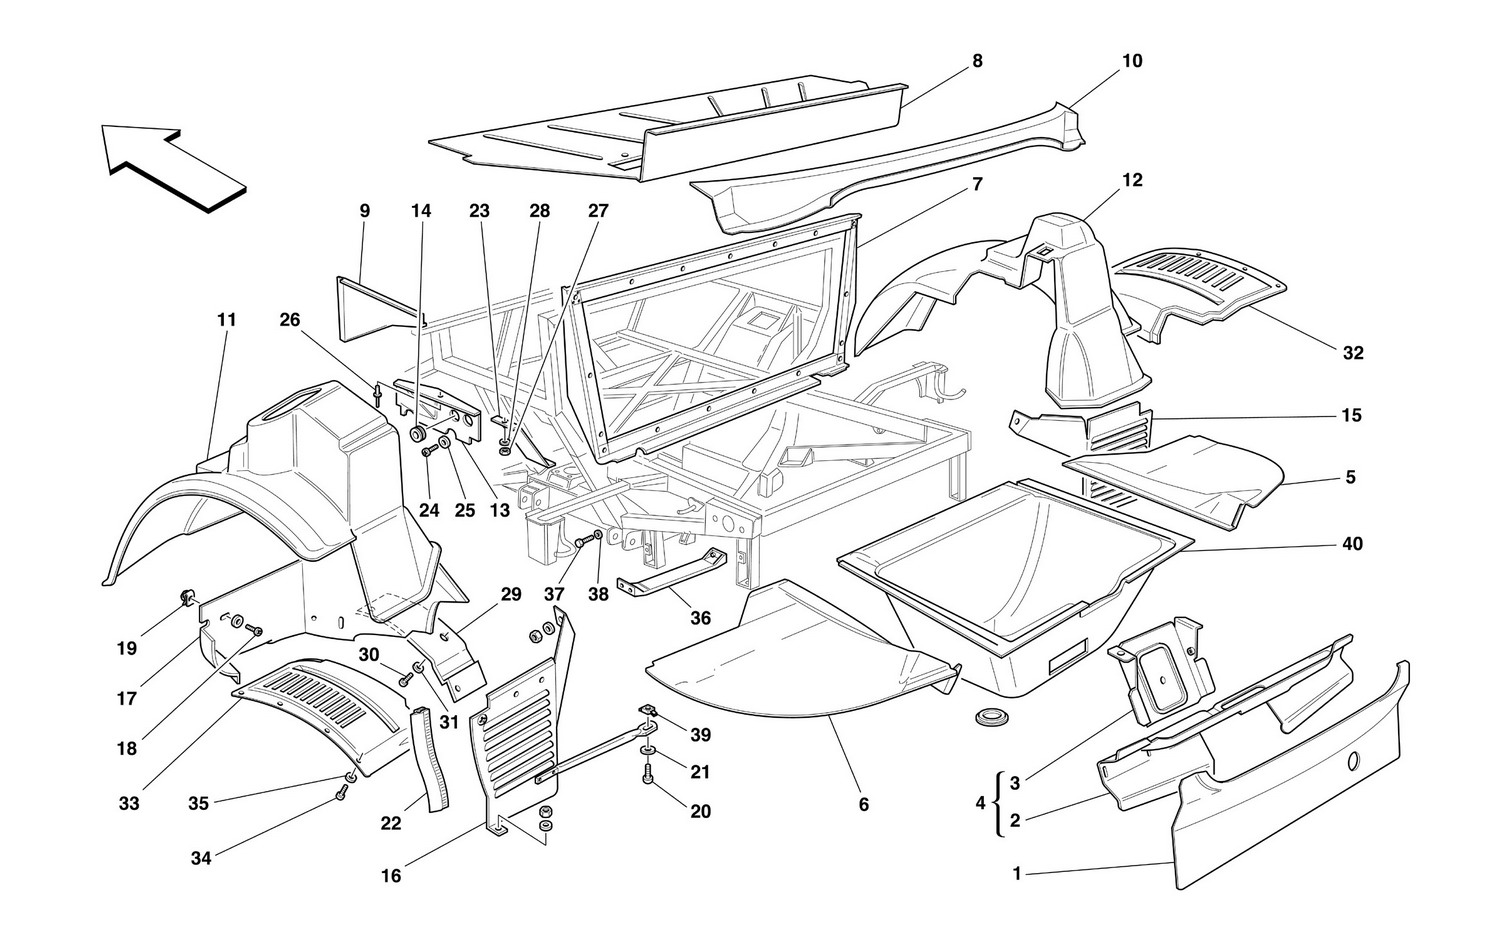 Schematic: Rear Structures And Components